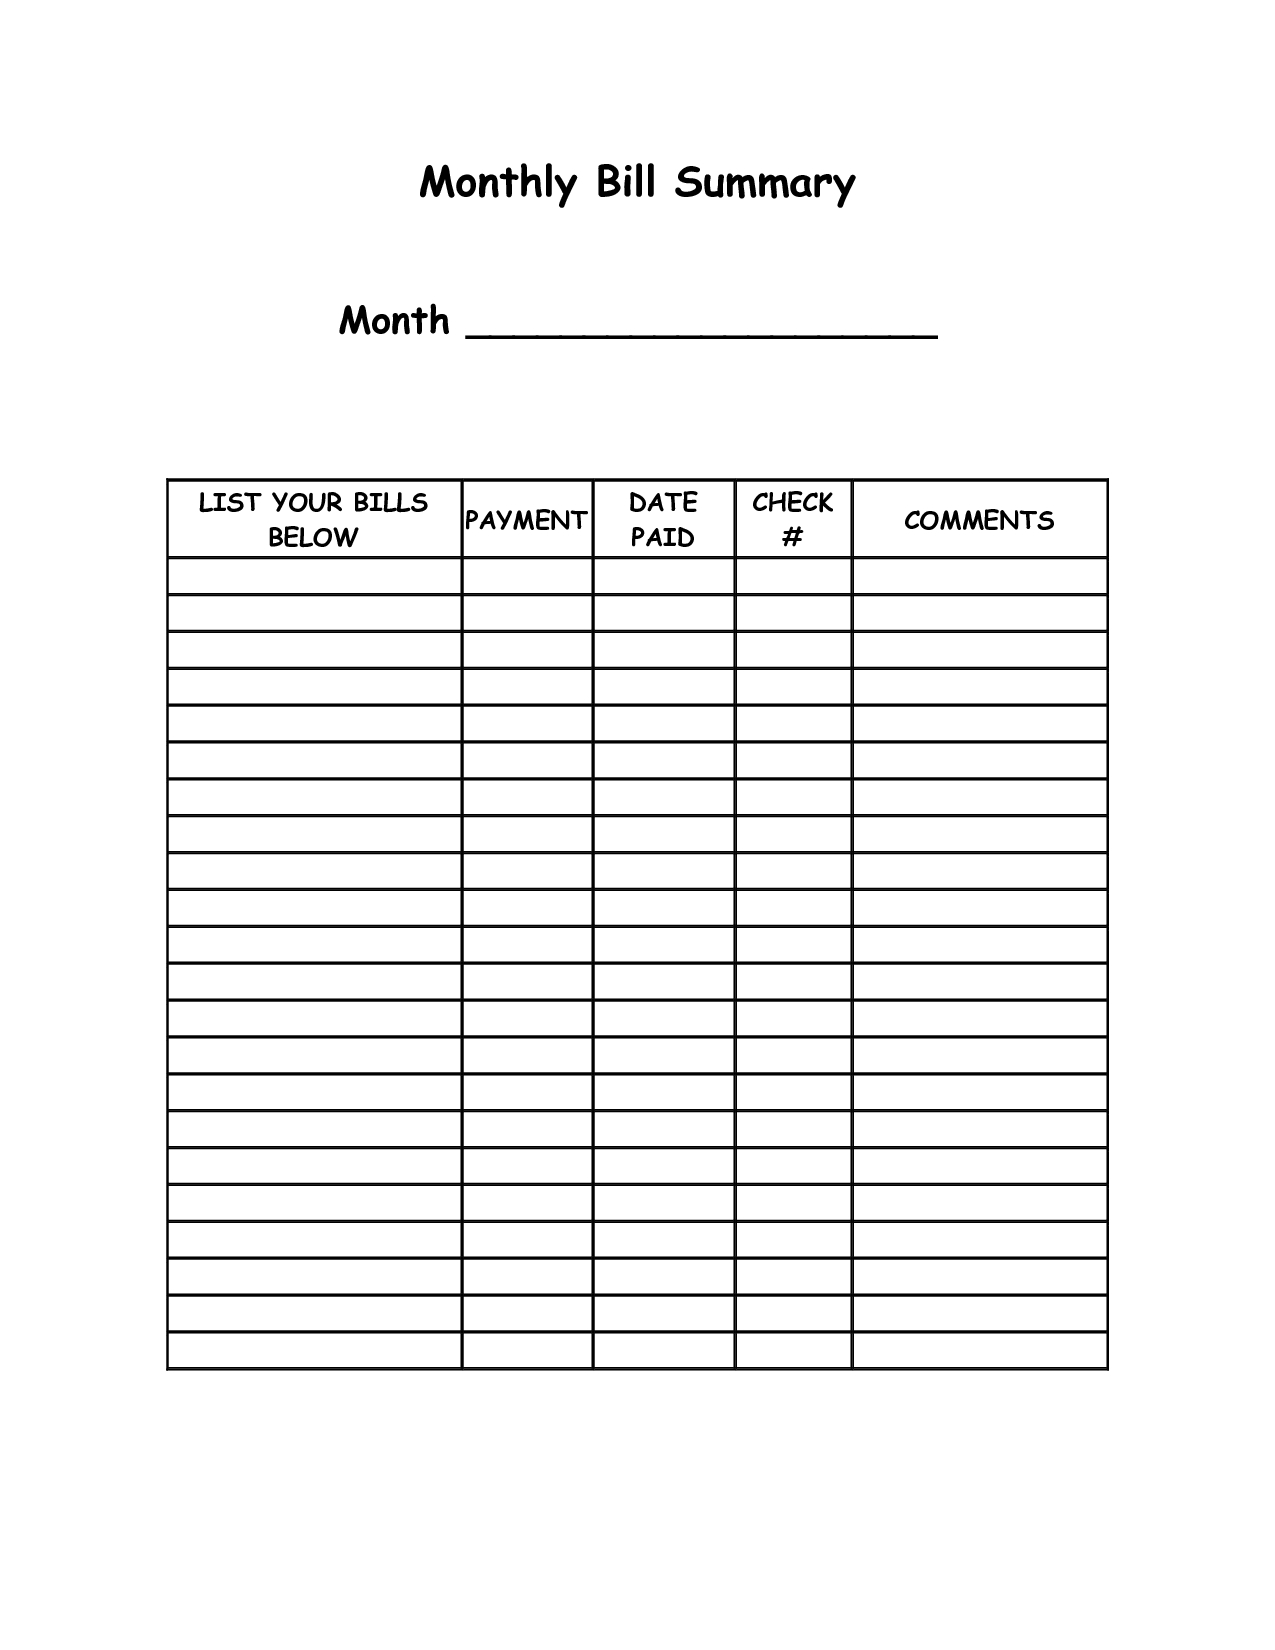 Blank Bill Payment Organizer | Monthly Bill Summary - Doc | Cats with Free Printable Bill Organizer Monthly Bill Pay